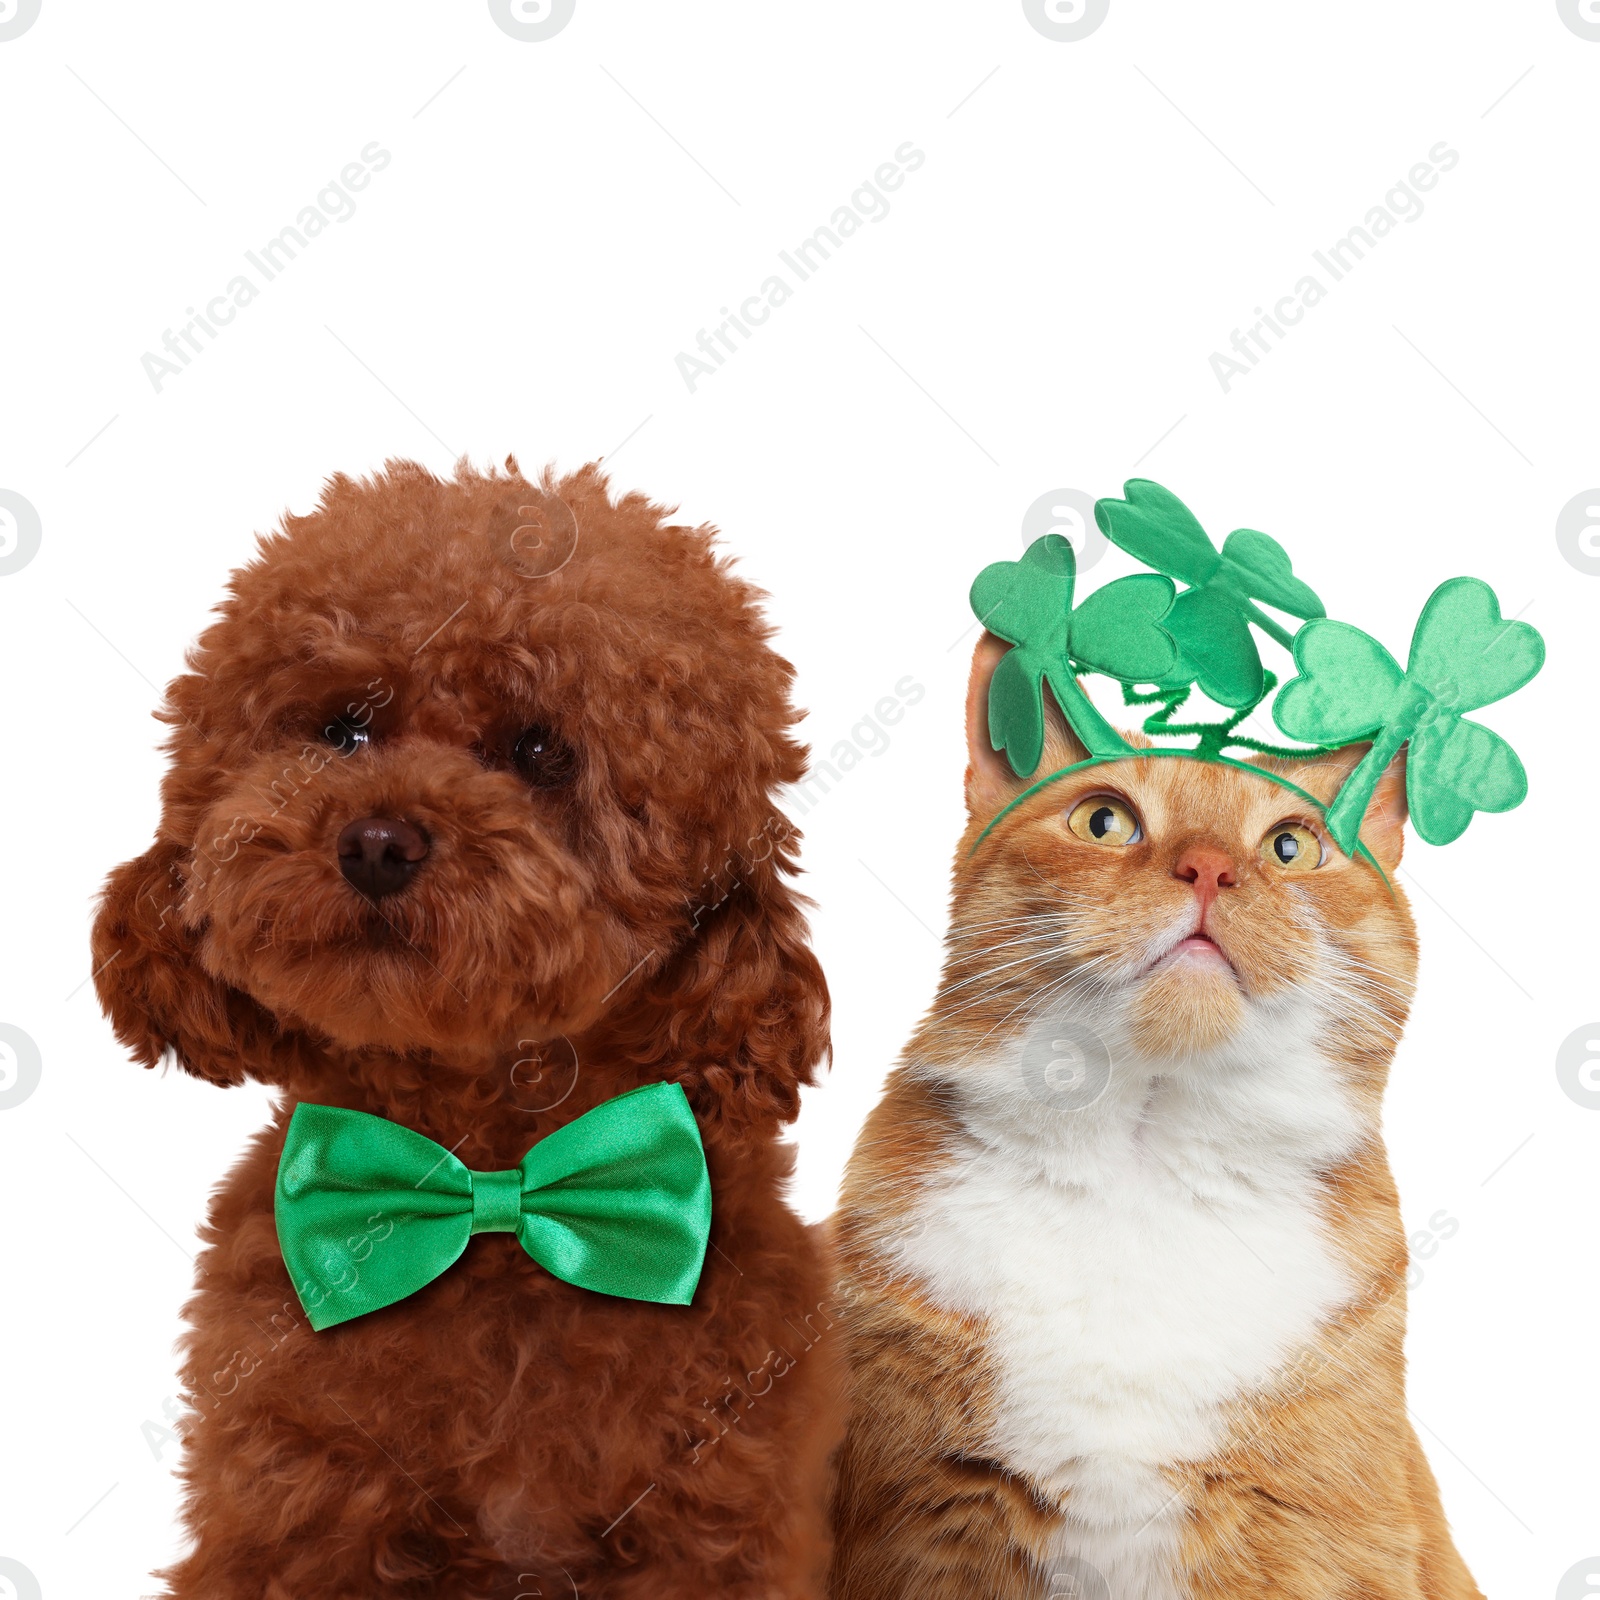 Image of St. Patrick's day celebration. Cute dog with green bow tie and cat wearing headband with clover leaves isolated on white